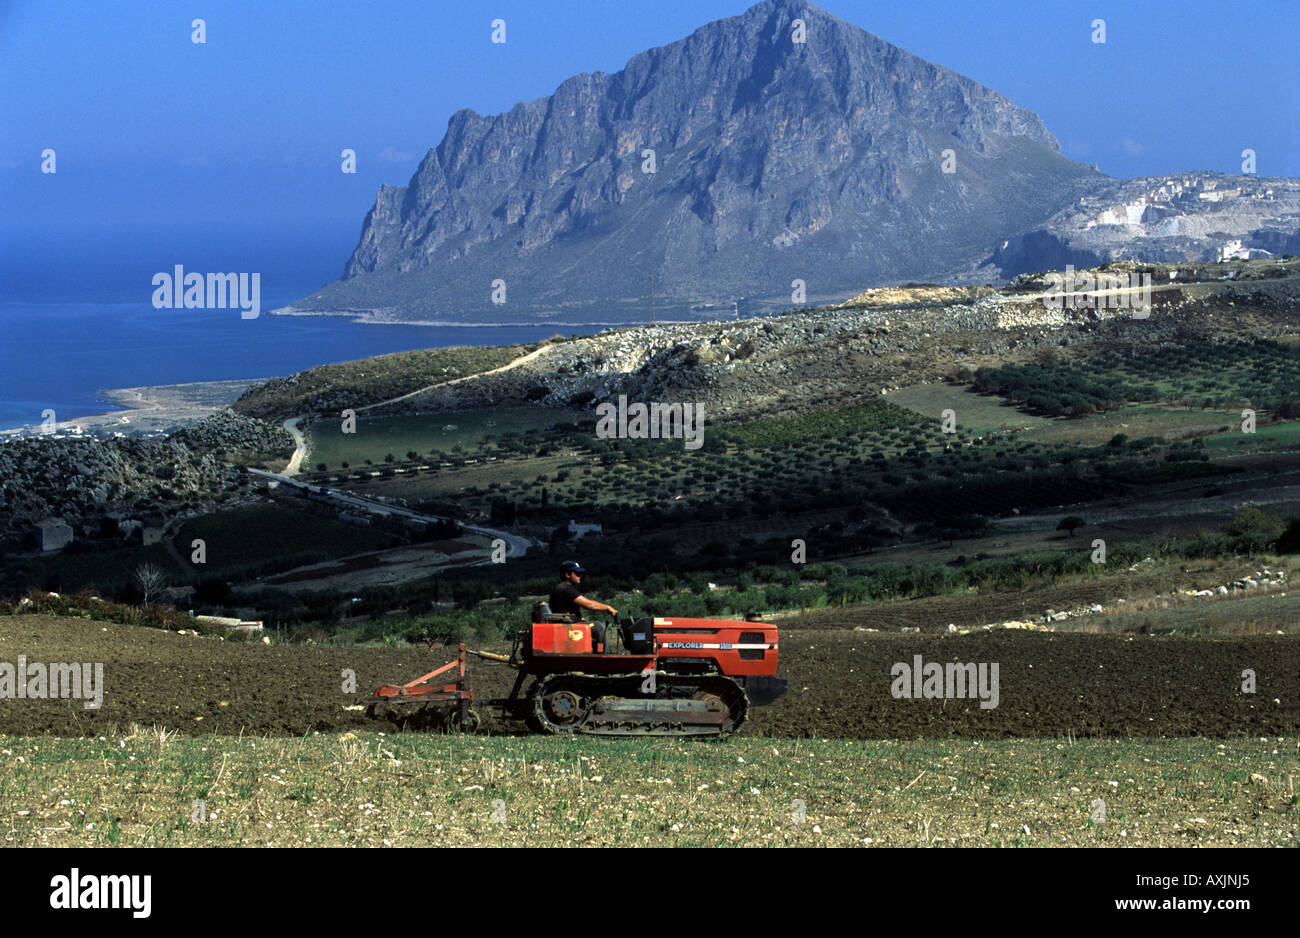 Land being cultivated on an organic farm in Valdarice, Sicily, Italy. Stock Photo